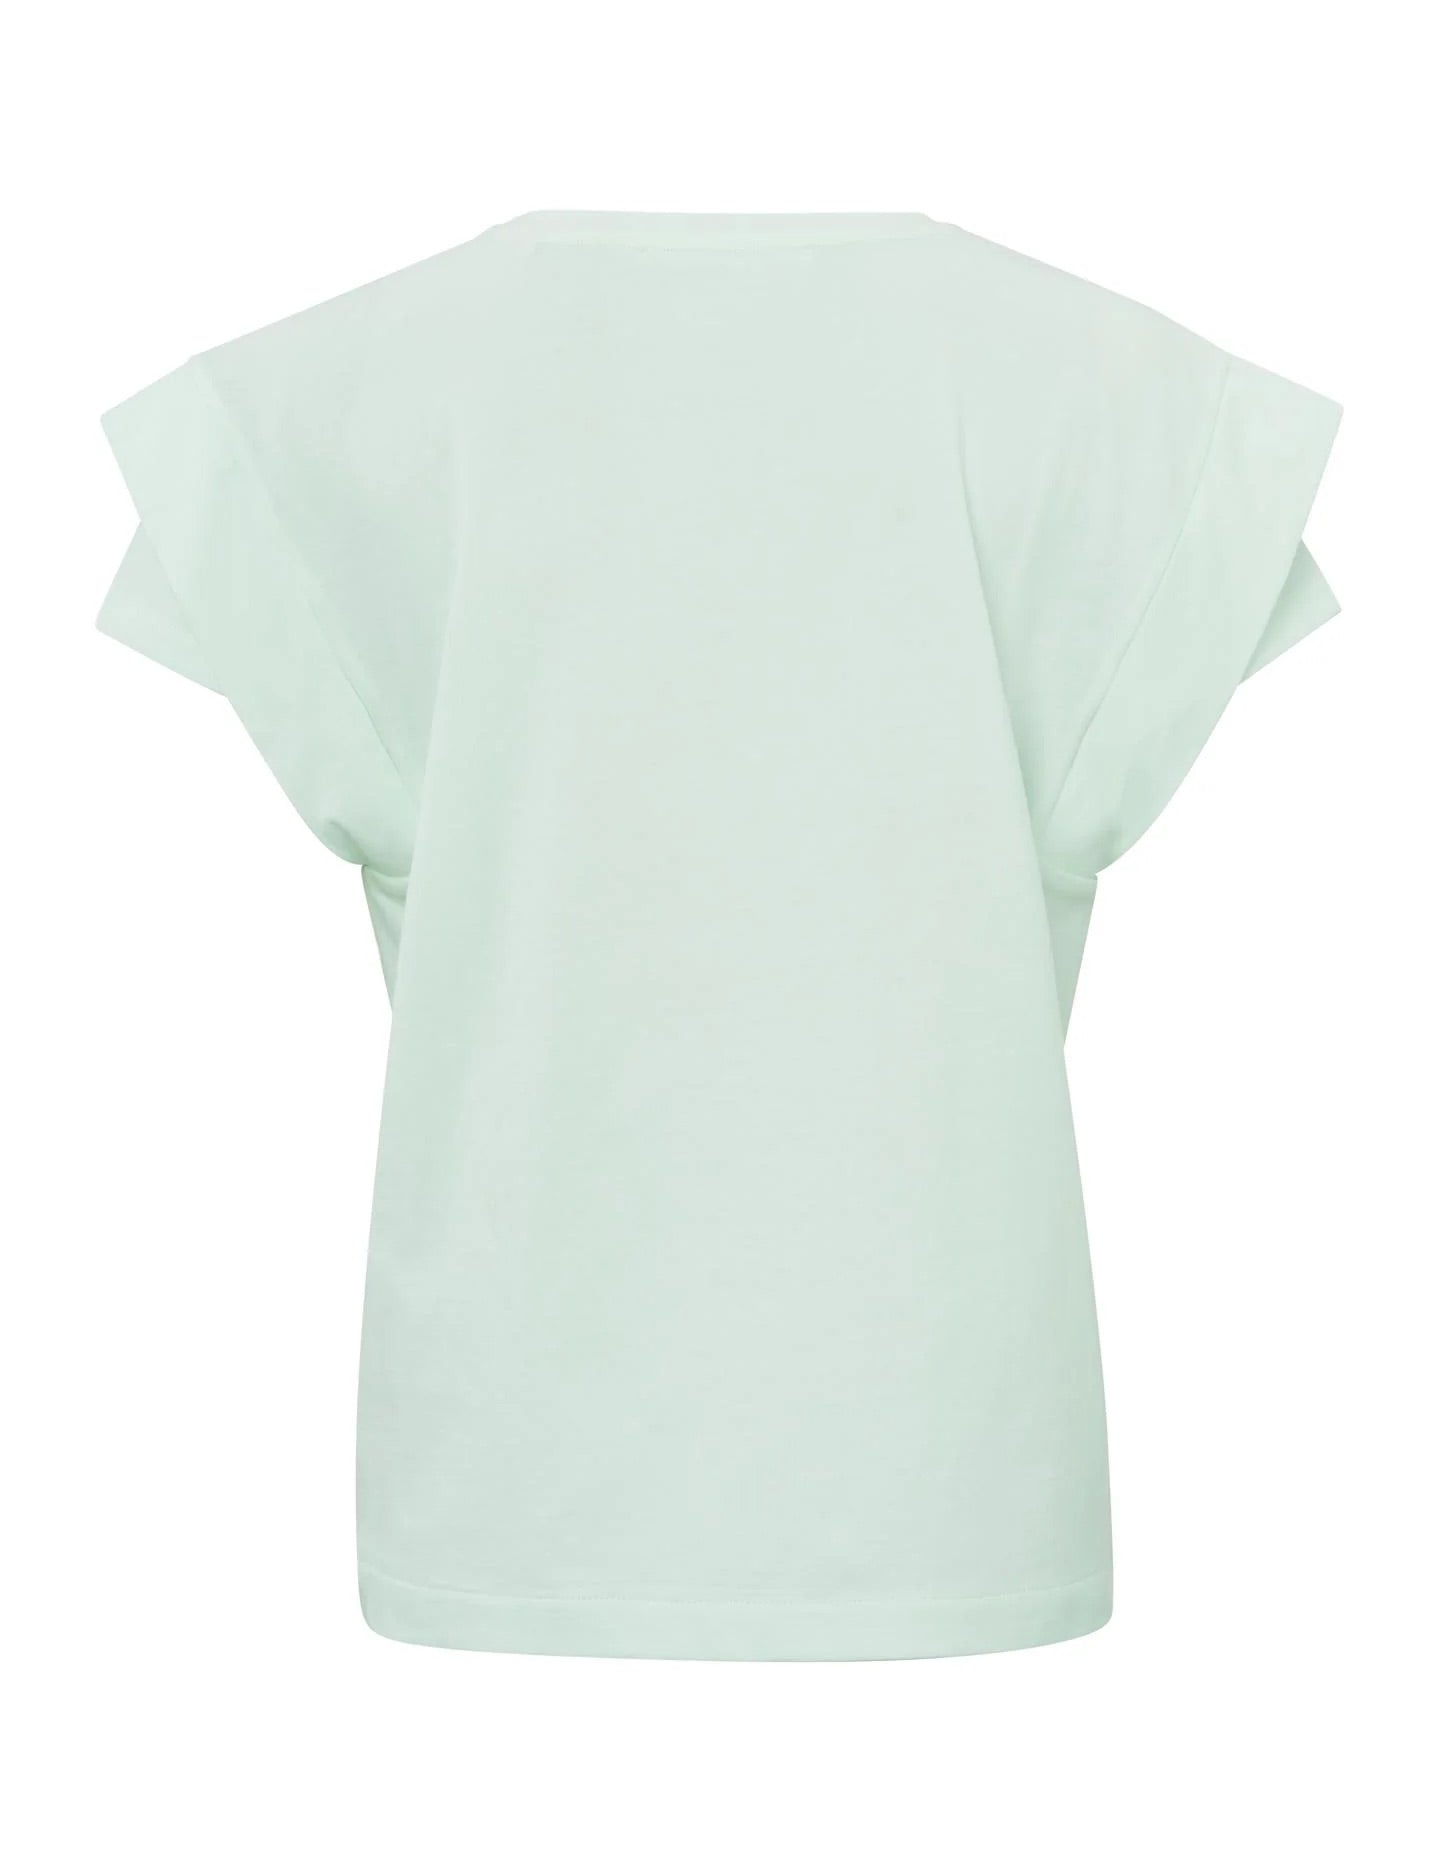 top-with-v-neck-and-double-short-sleeves-in-regular-fit-hint-of-mint-green_ede55df9-7286-4564-af70-12cdc5e61651_2880x_jpg.jpg